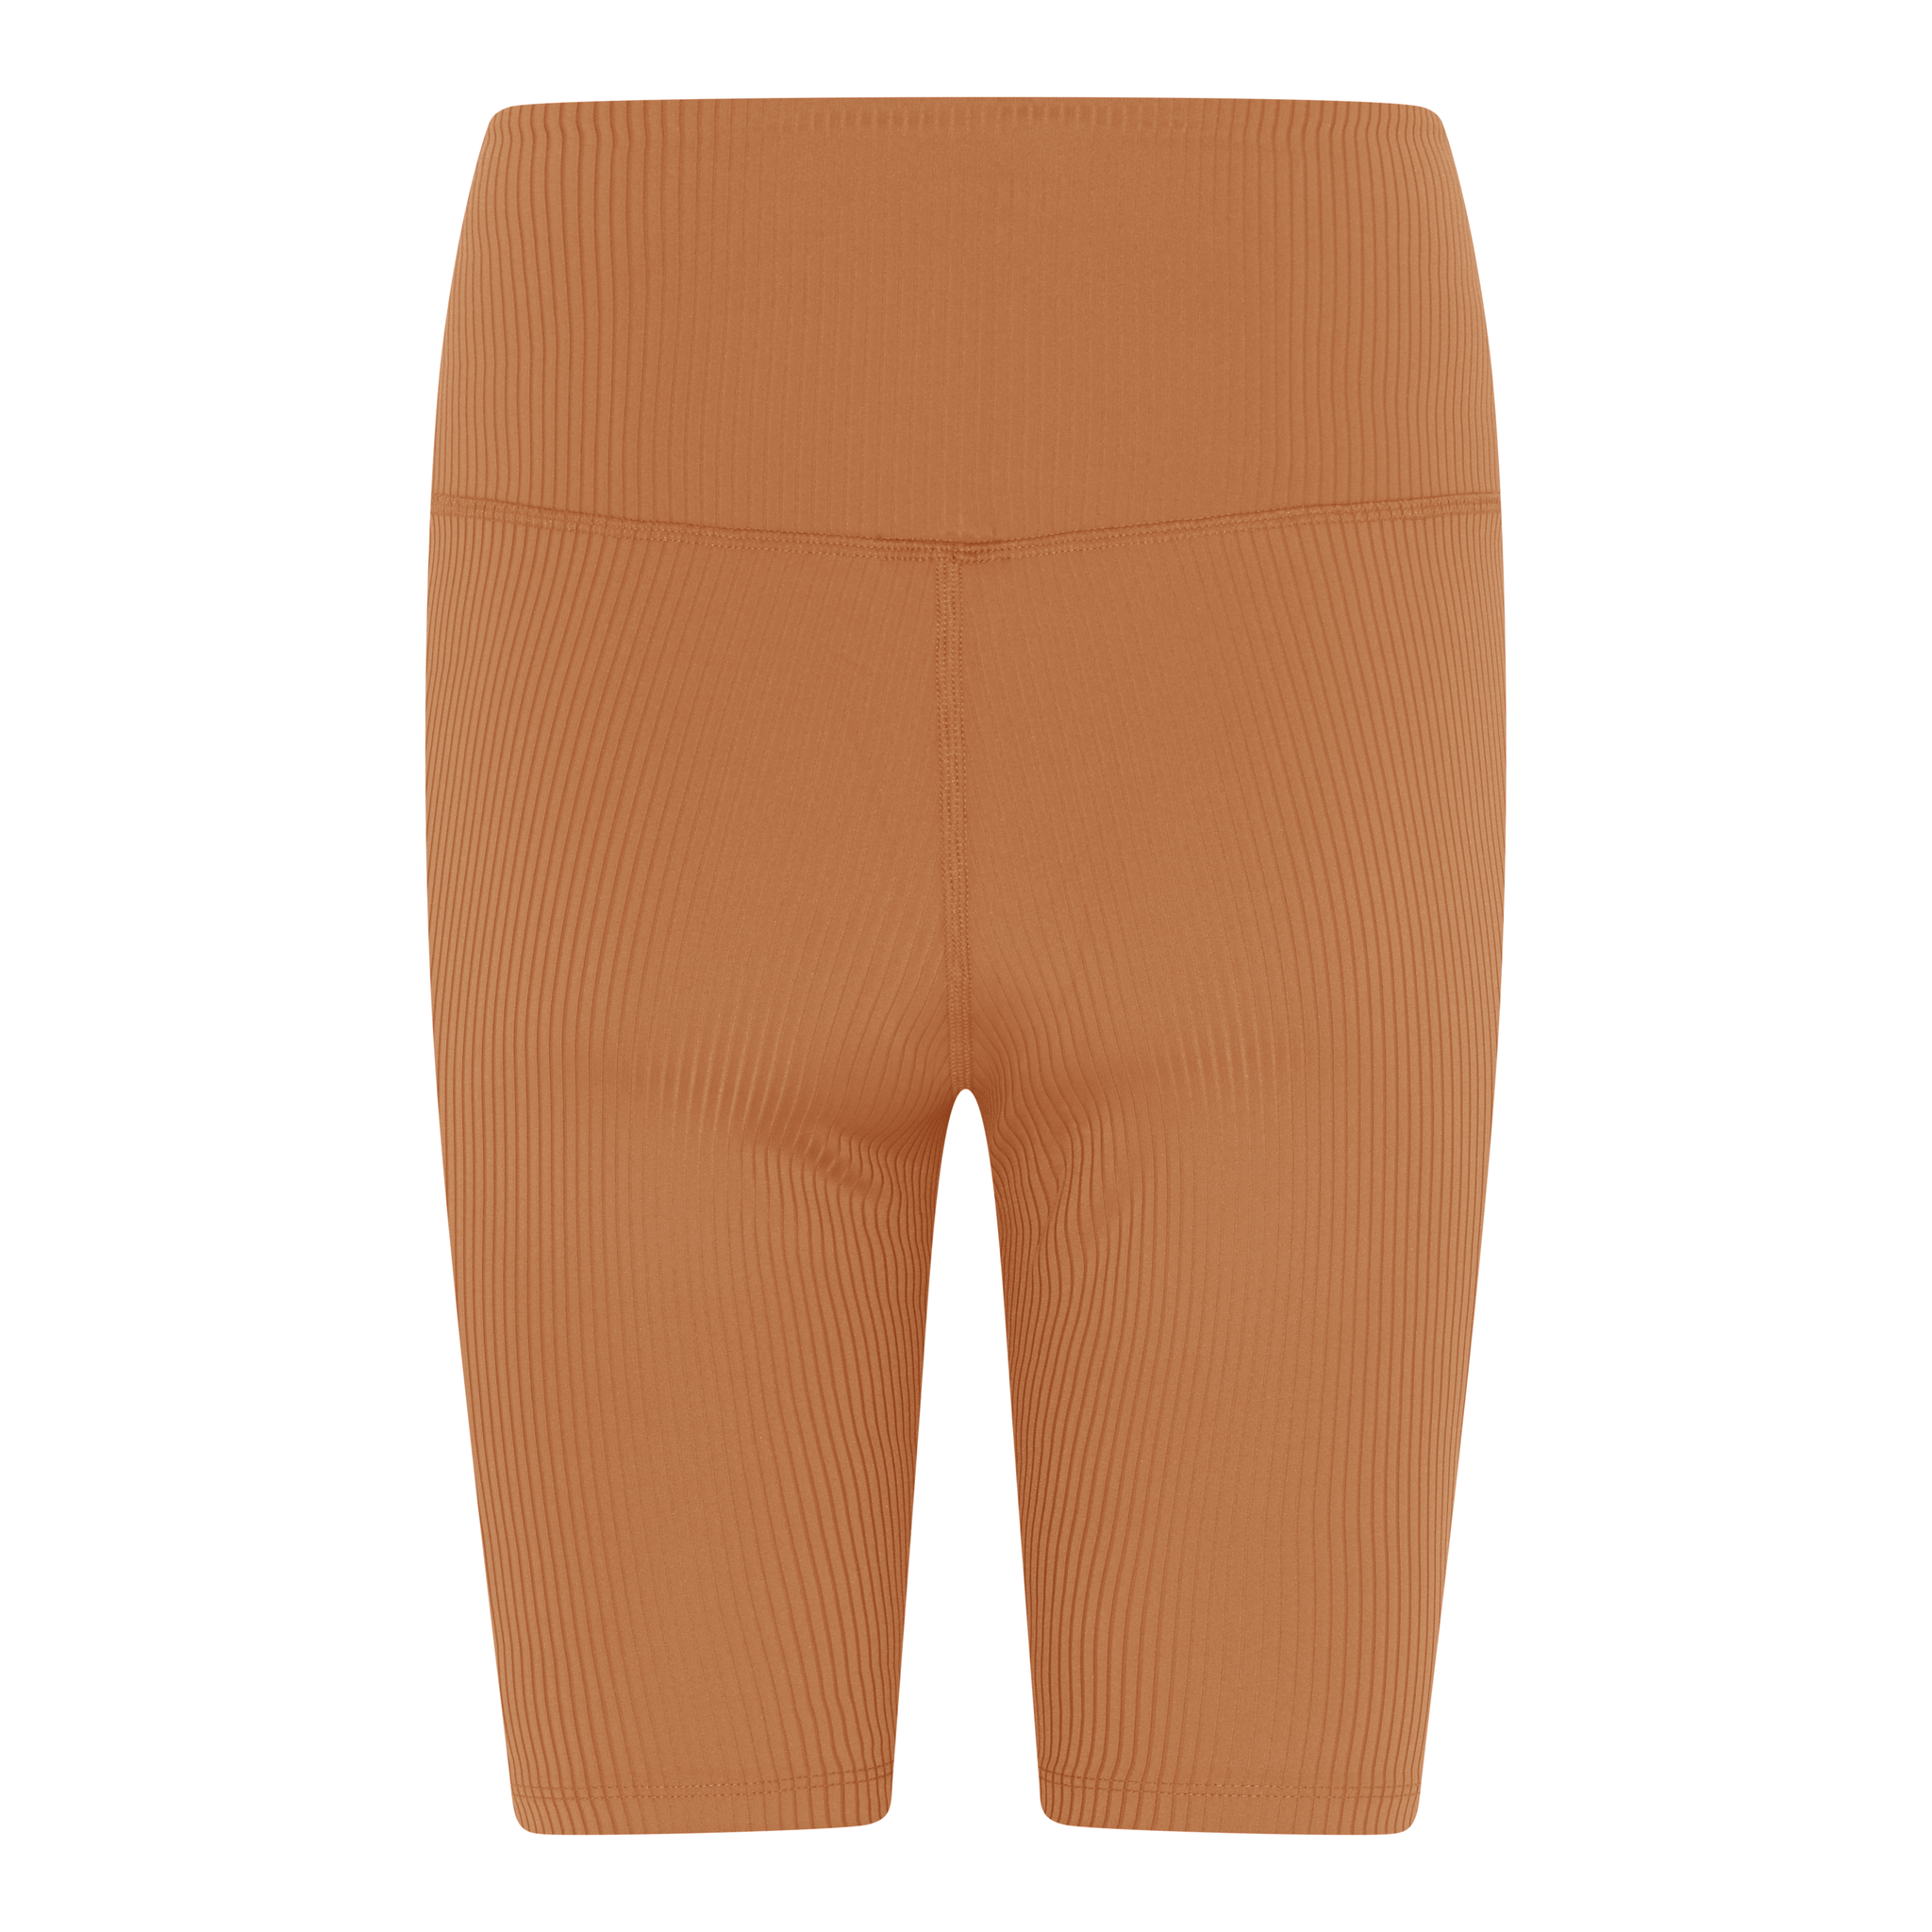 Girlfriend Collective High Rise Rib Bike Short in Toffee